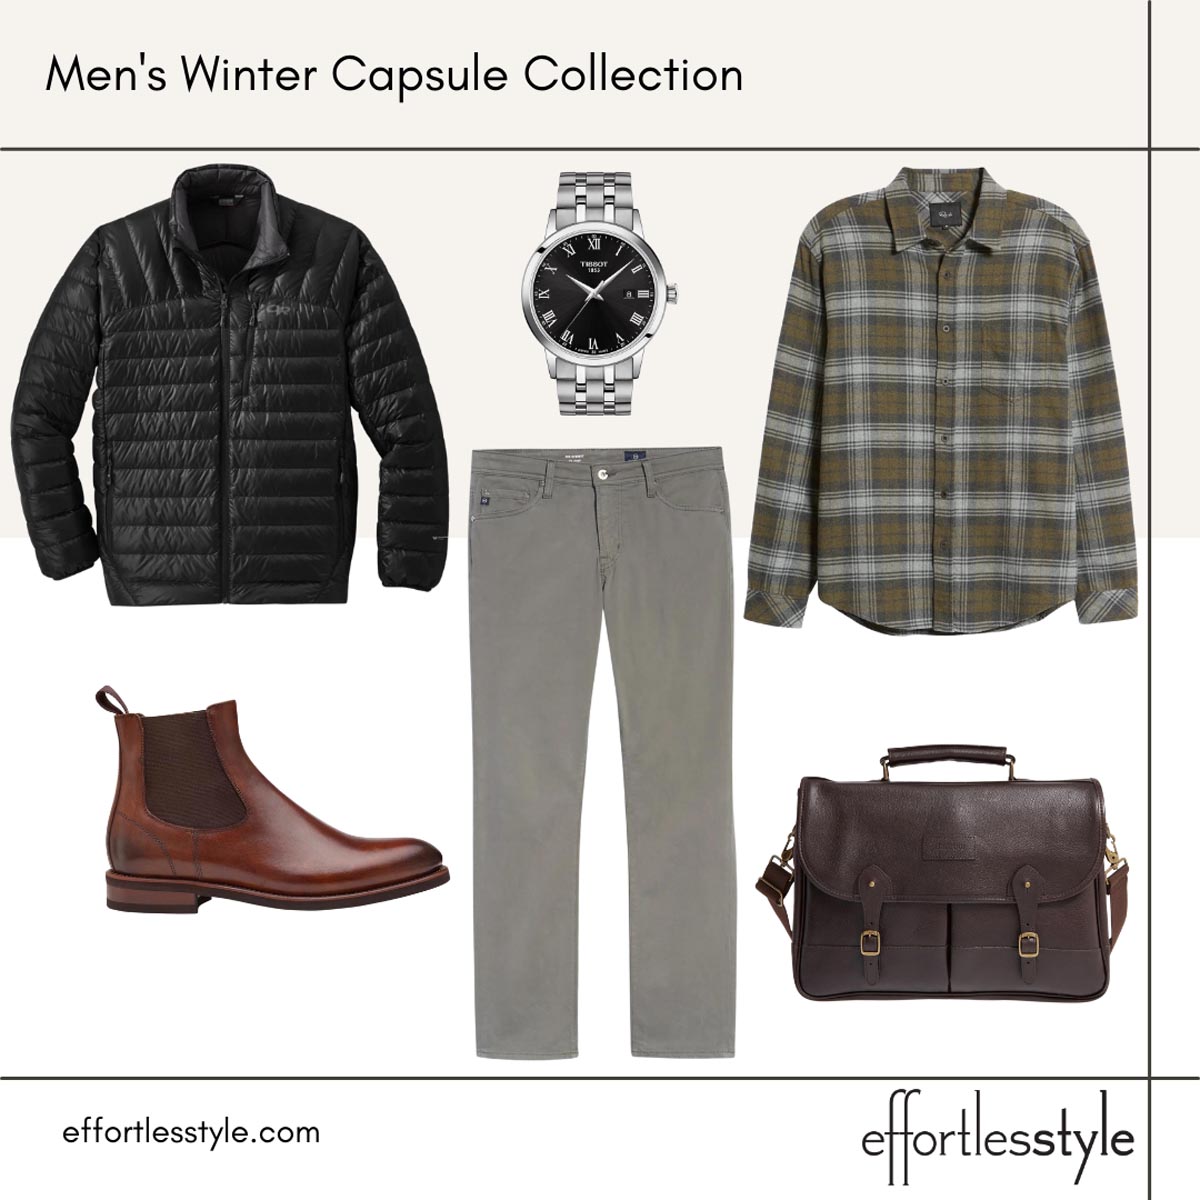 Men's Winter Capsule Collection flannel shirt looks flannel shirt outfits for men flannel shirt style inspiration for guys flannel shirt and boots flannel shirt and chinos boots and chinos